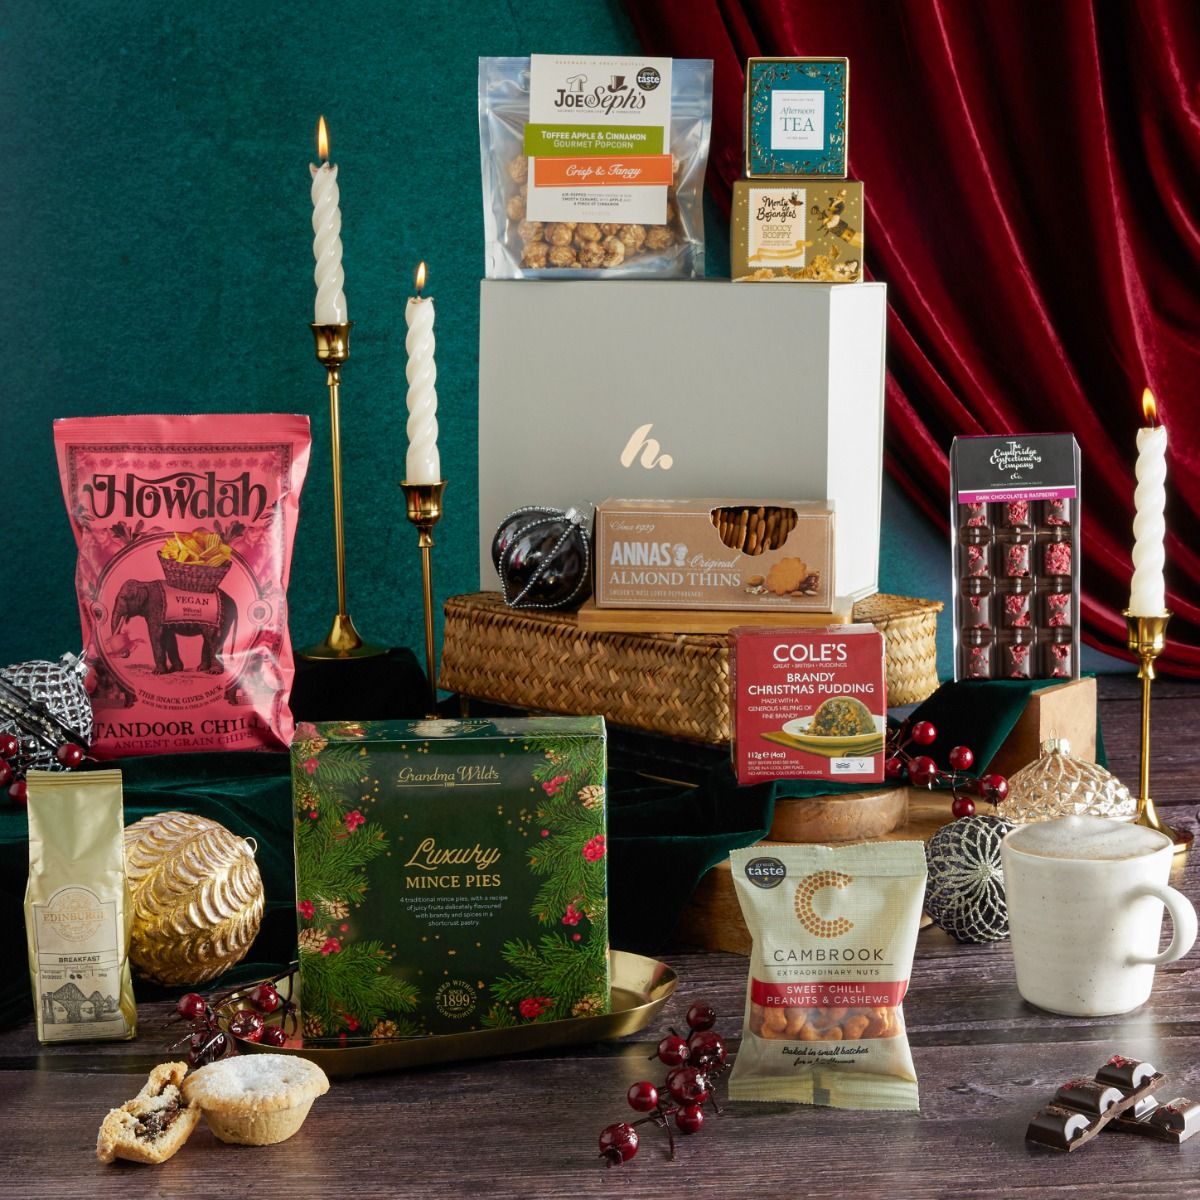 Festive Feast Gift Box with Christmas food contents on display